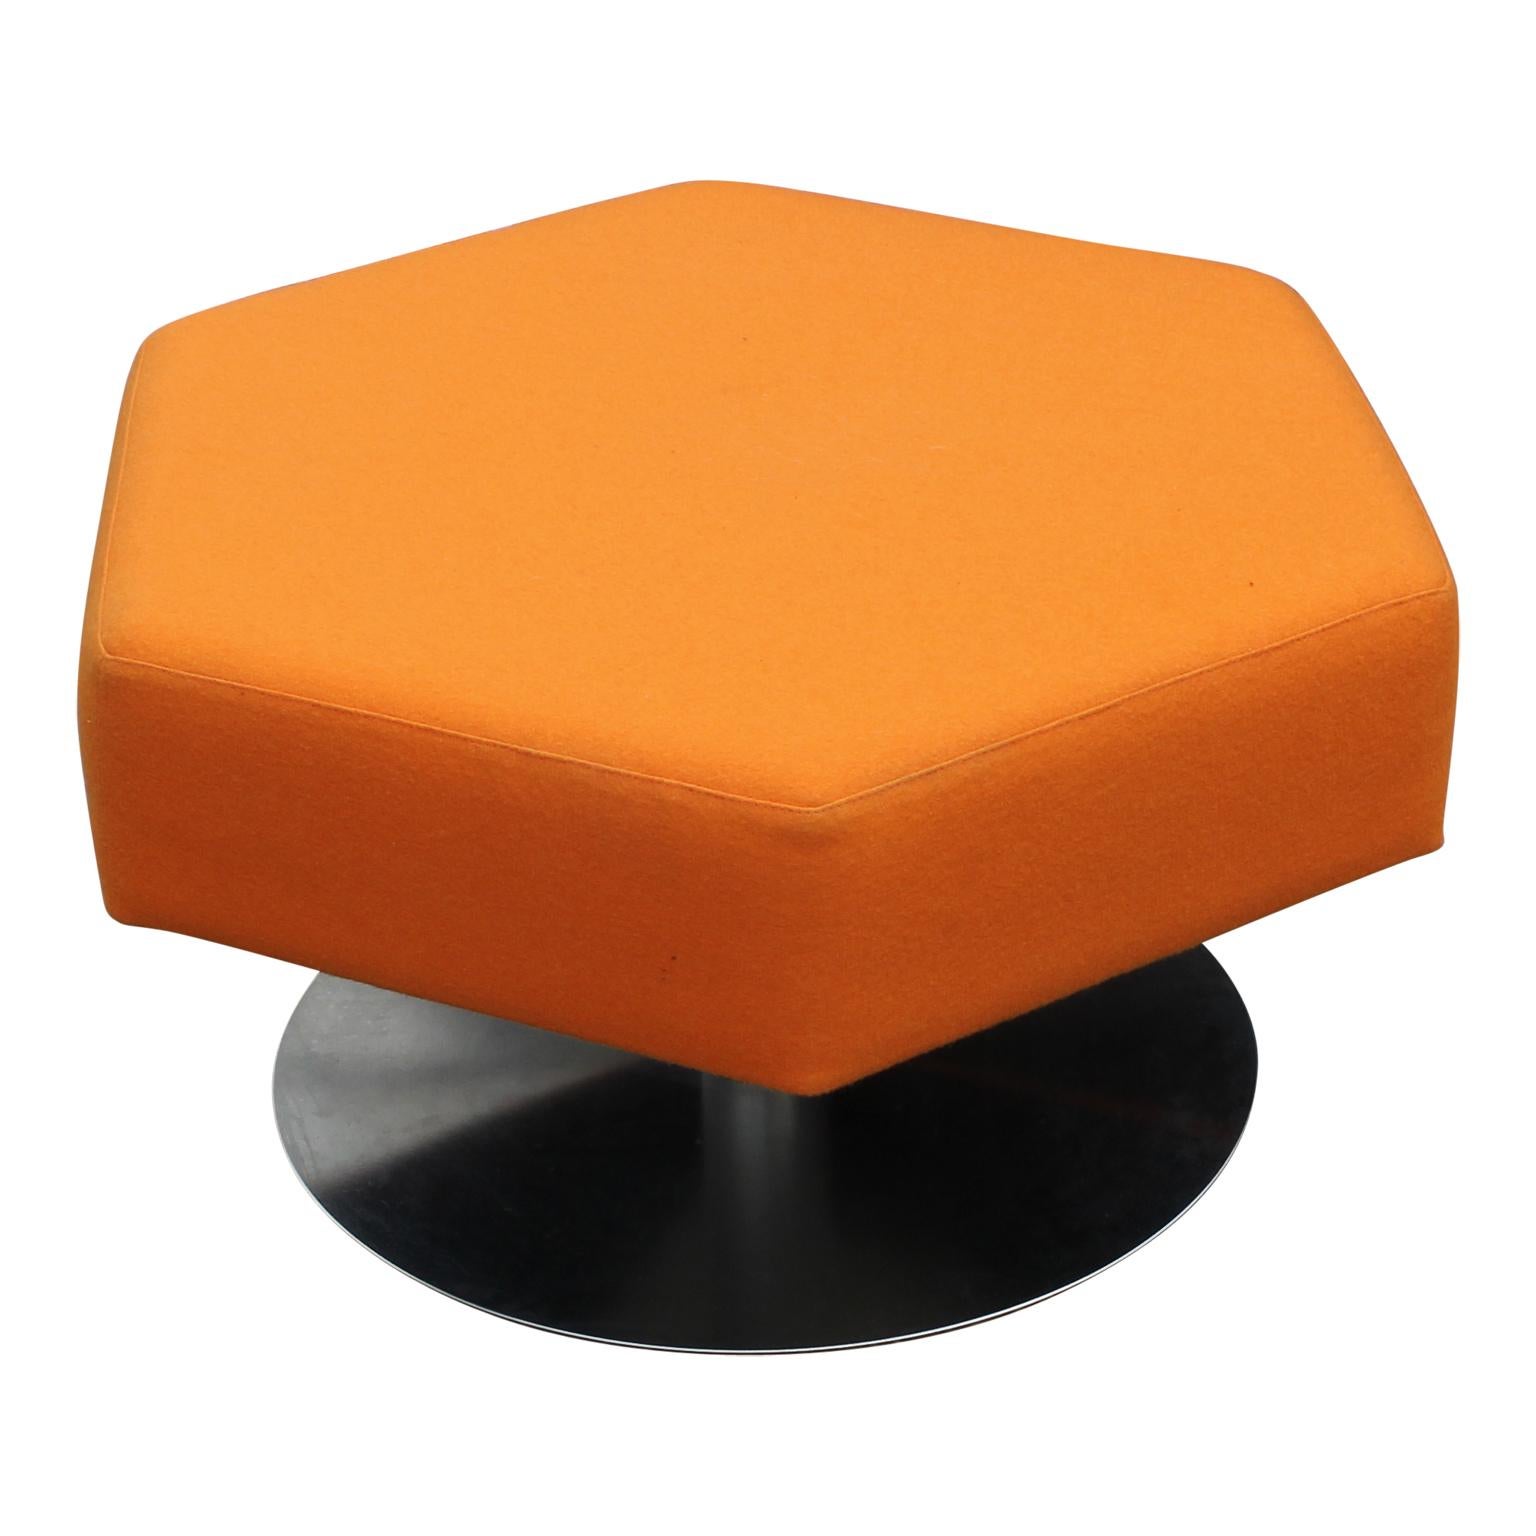 Comfy modern interconnecting hexagonal modular stool or ottoman. They are from the six Collection by Nienkamper. They are covered in their original fabric, but they can be recovered by COM if desired. We suggest cleaning the fabric if they are not